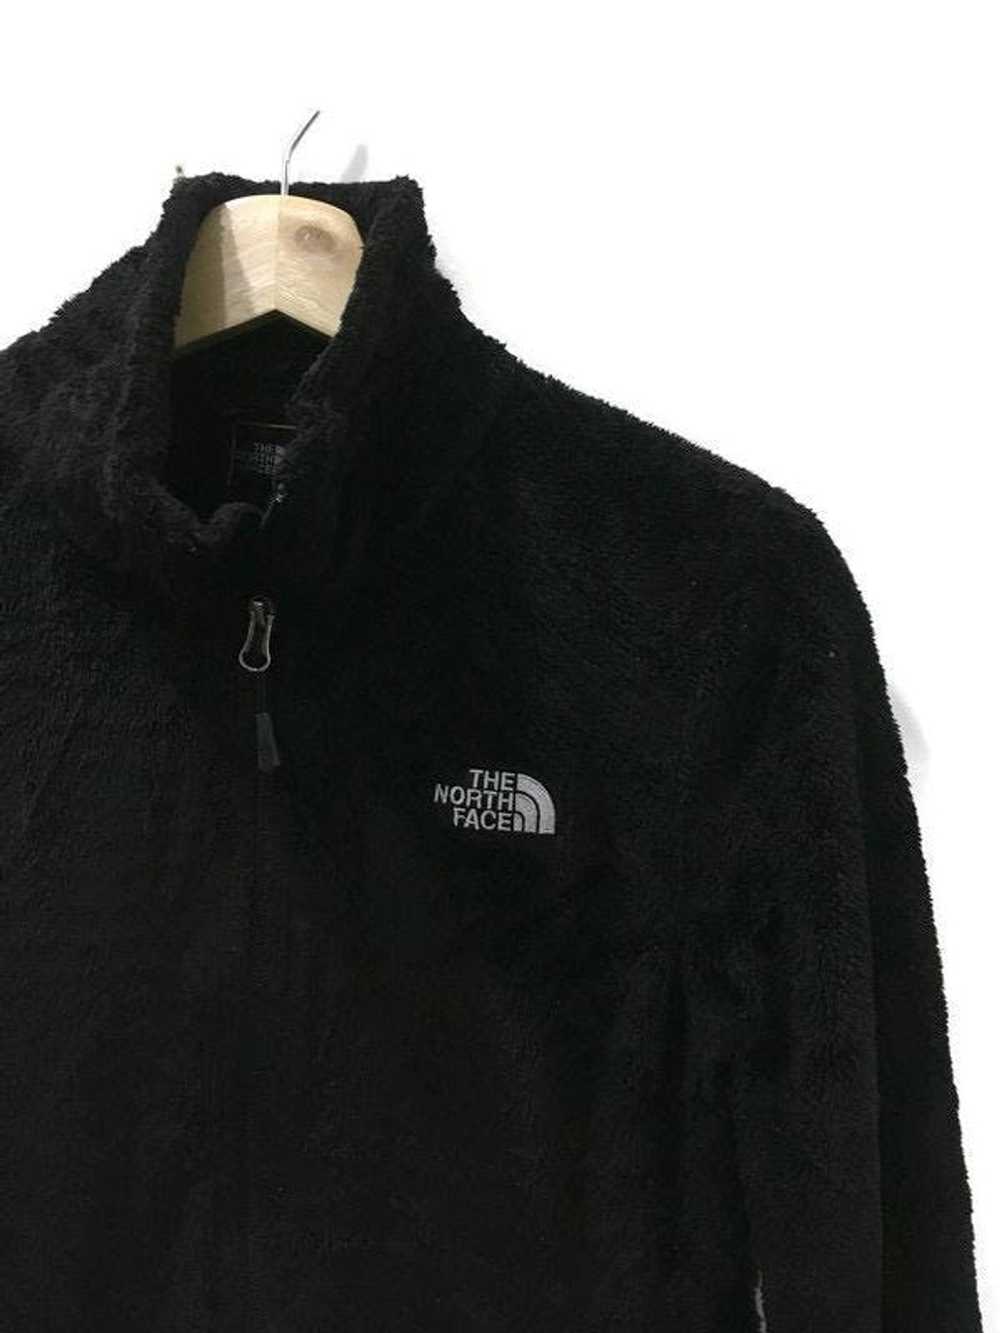 The North Face The North Face Velvet Jacket - image 2